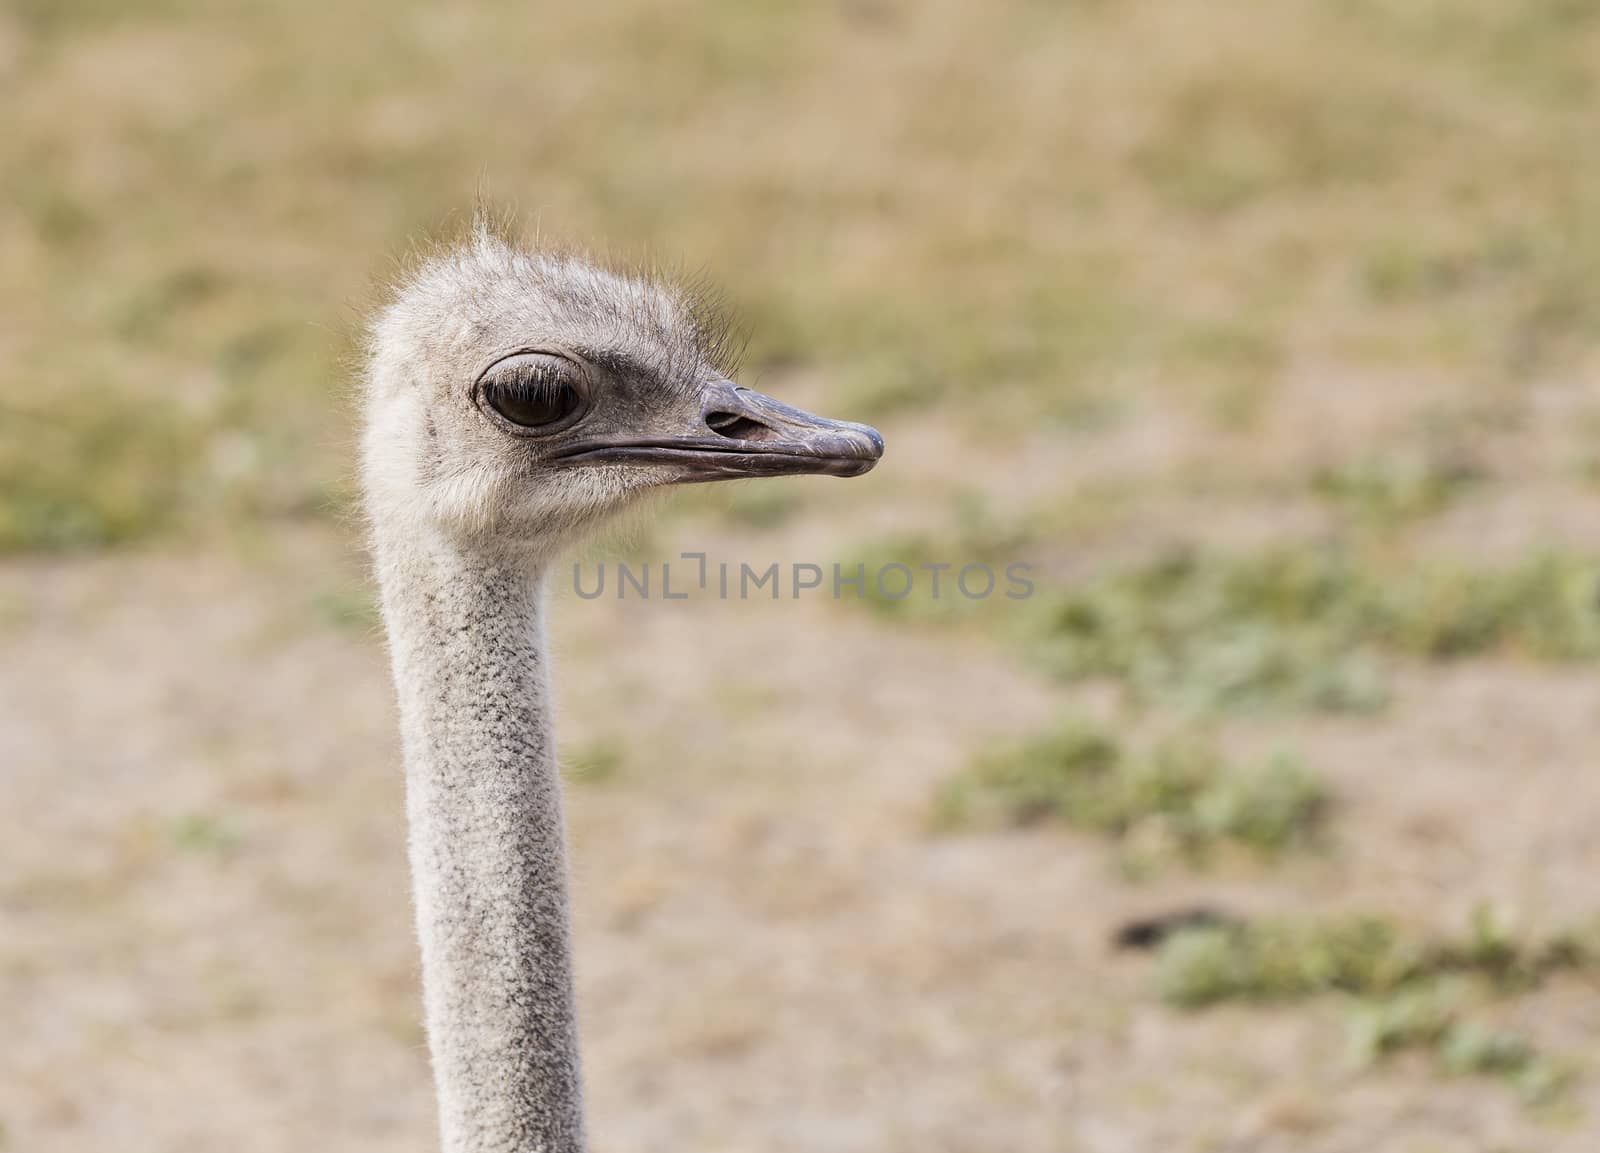 Head of an ostrich close-up outdoors. The ostrich on the farm looks curiously into the distance